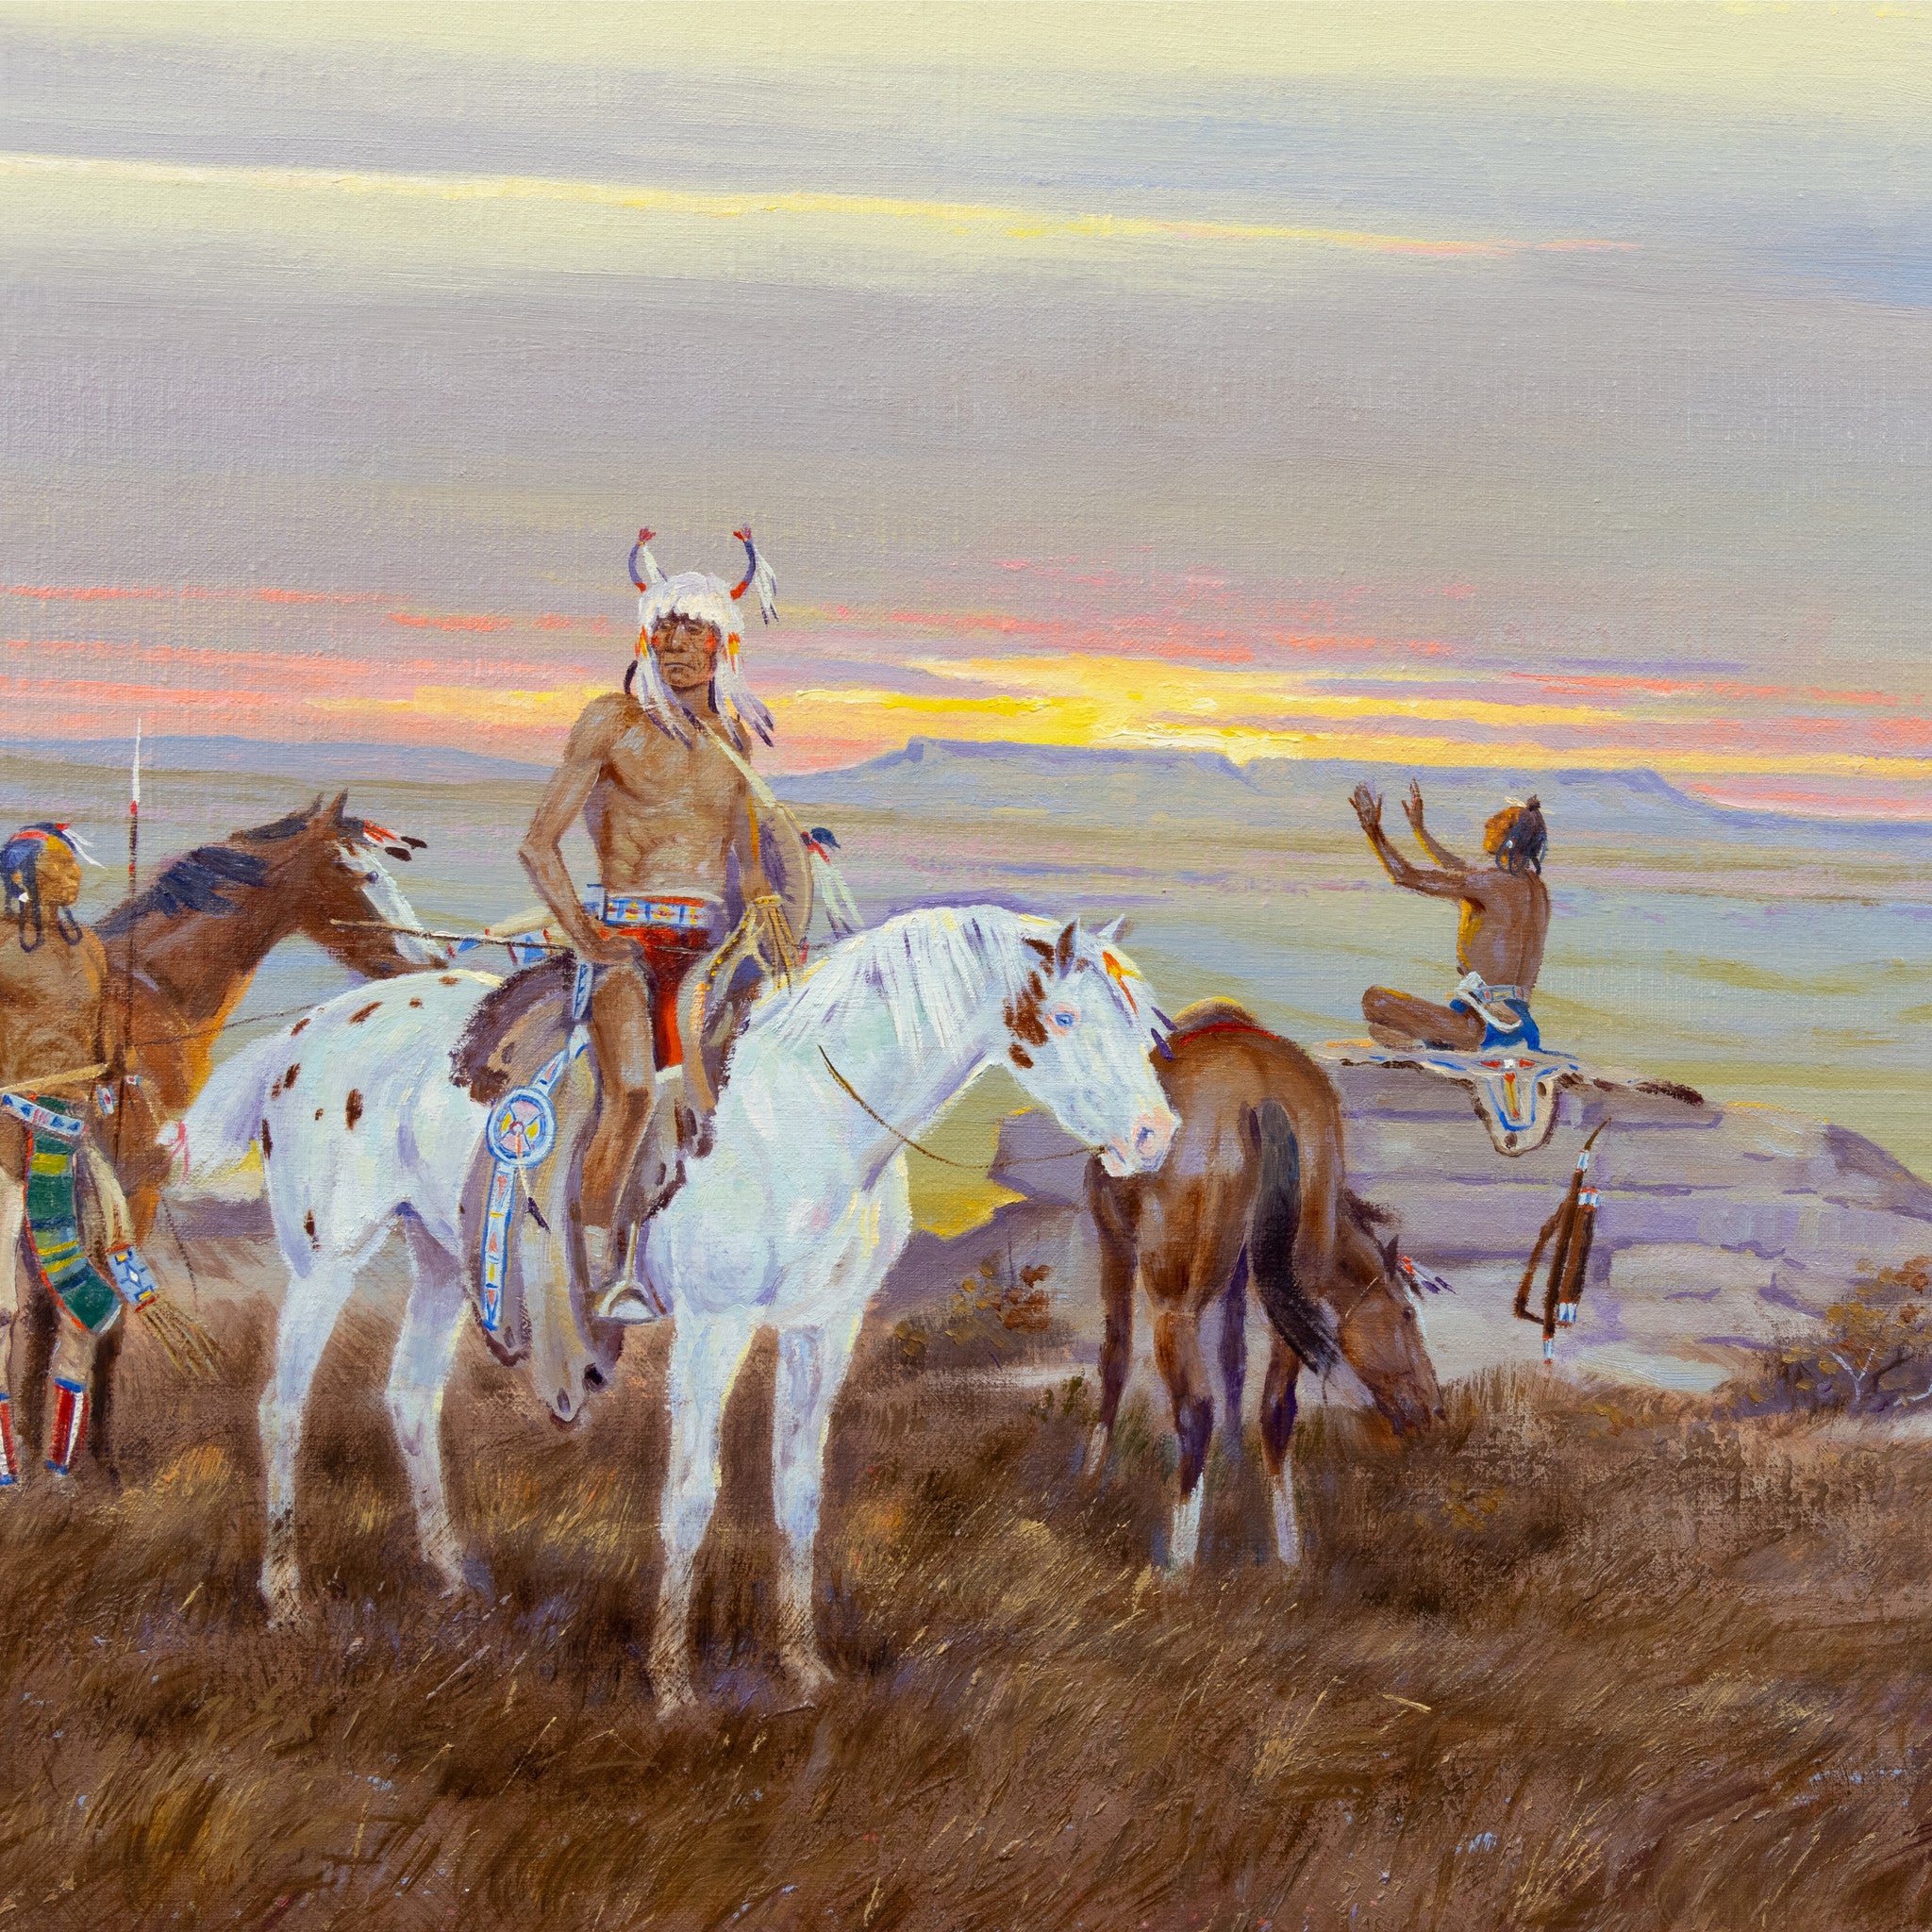 "Native Americans at Sunset" by Ace Powell